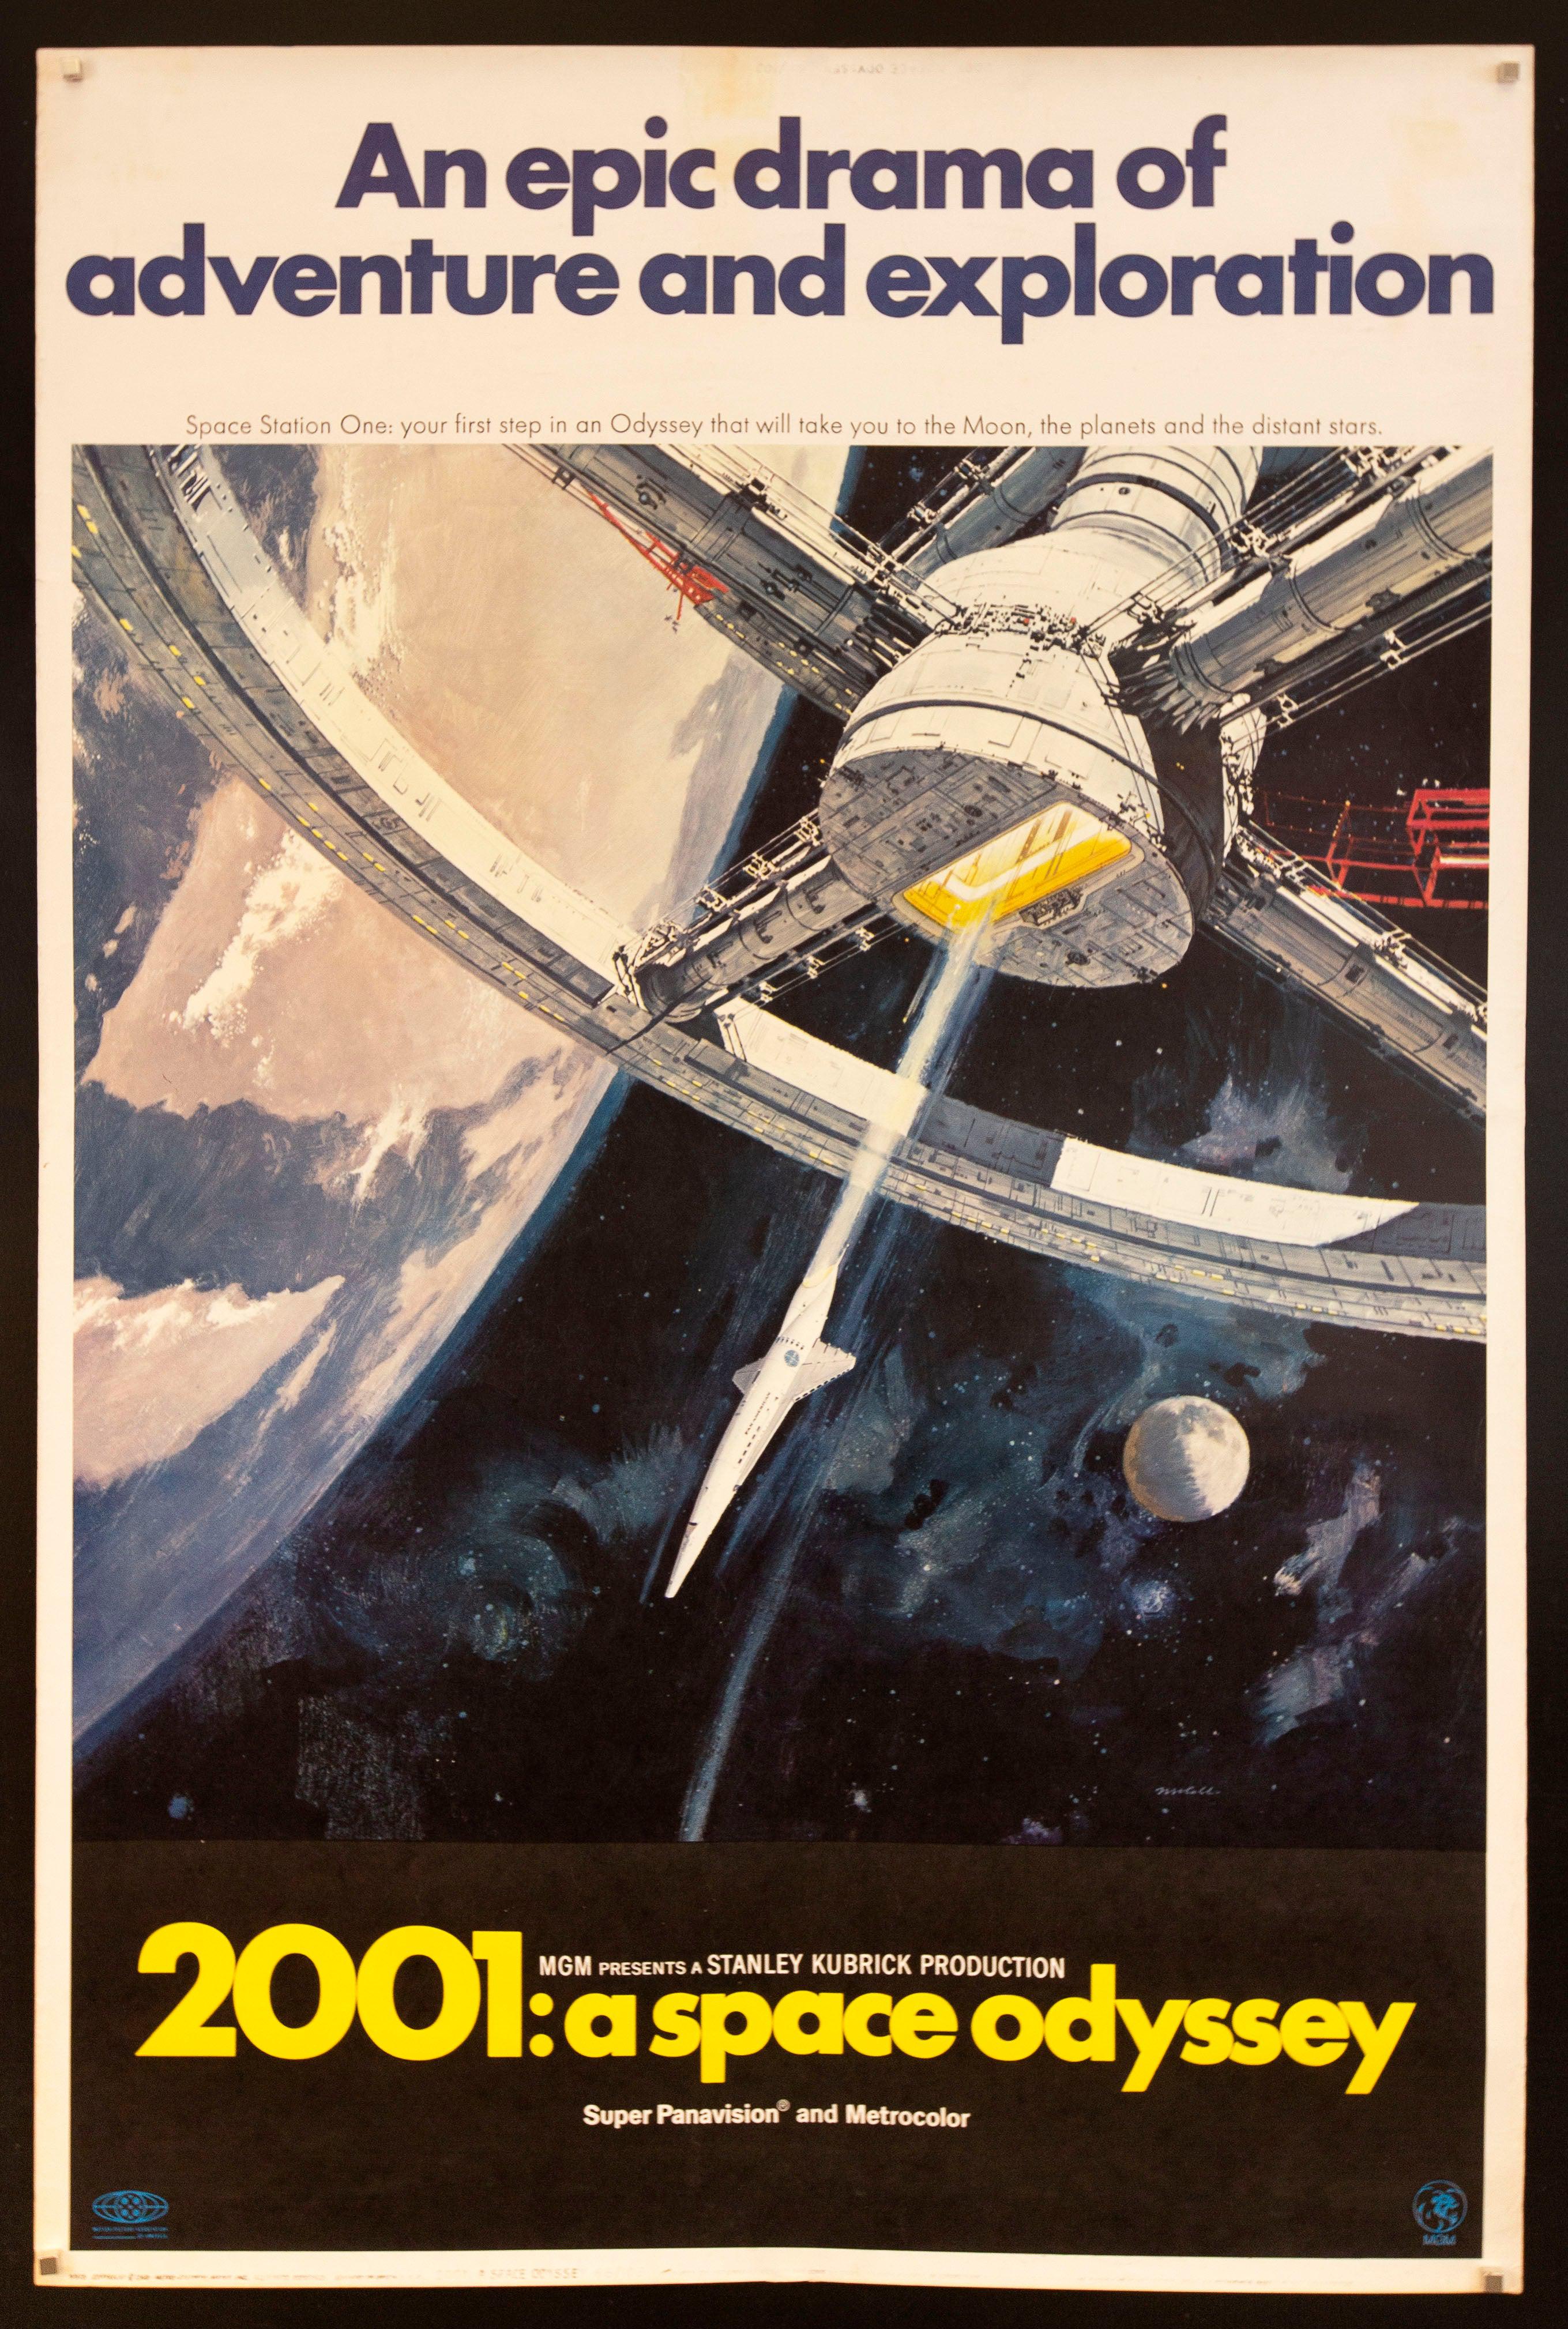 Artwork for 2001: A Space Odyssey